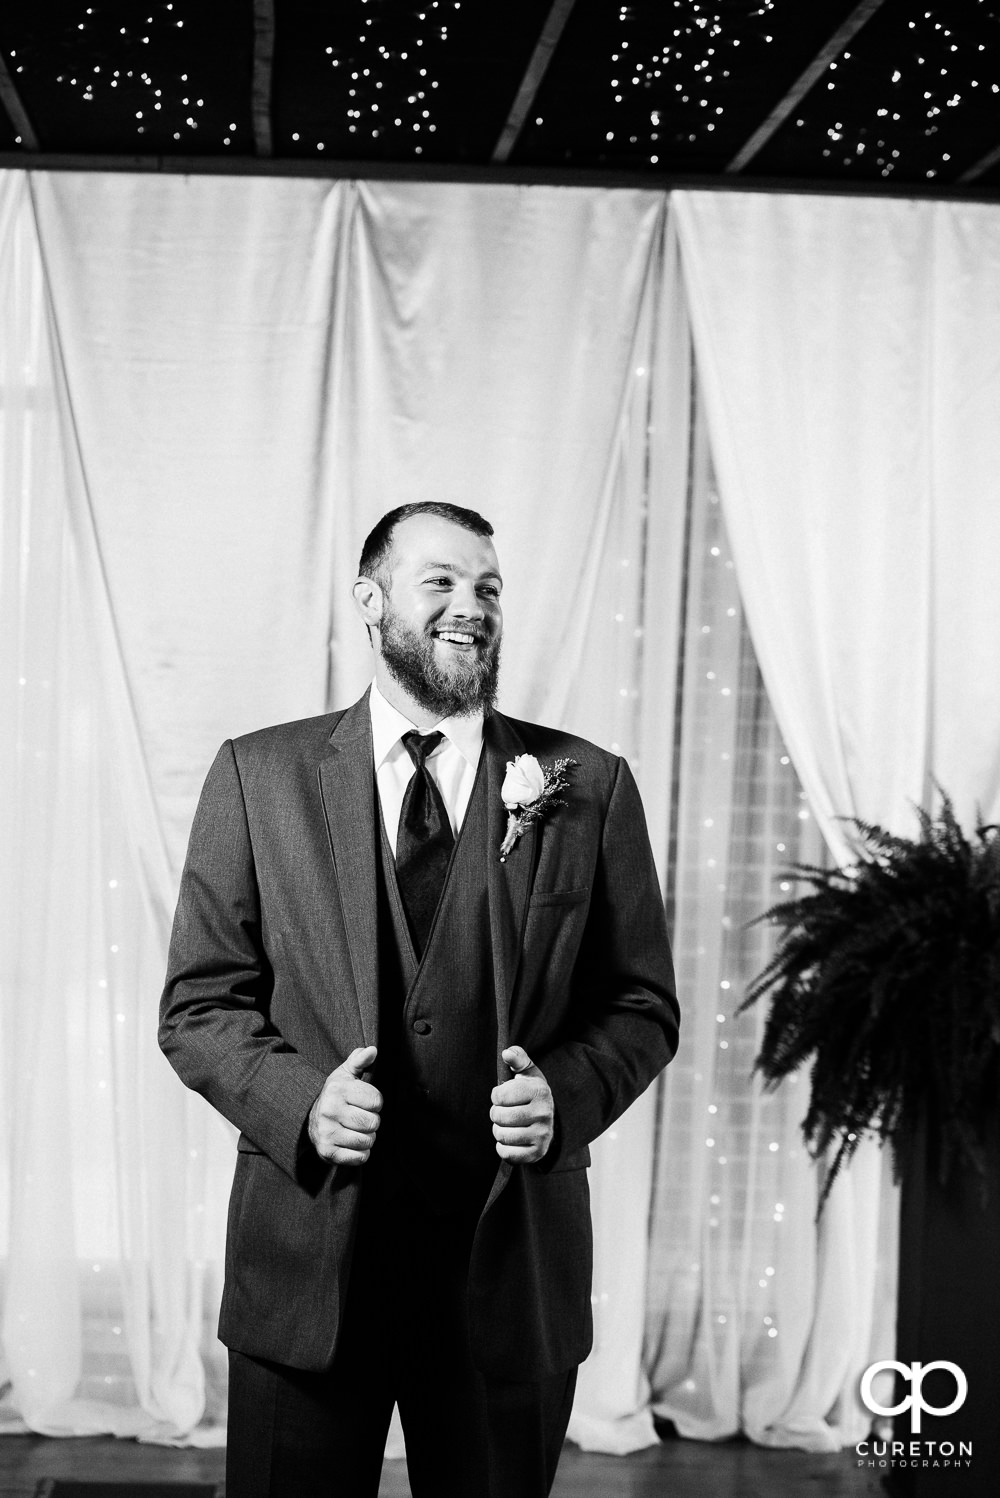 Groom standing at the alter.